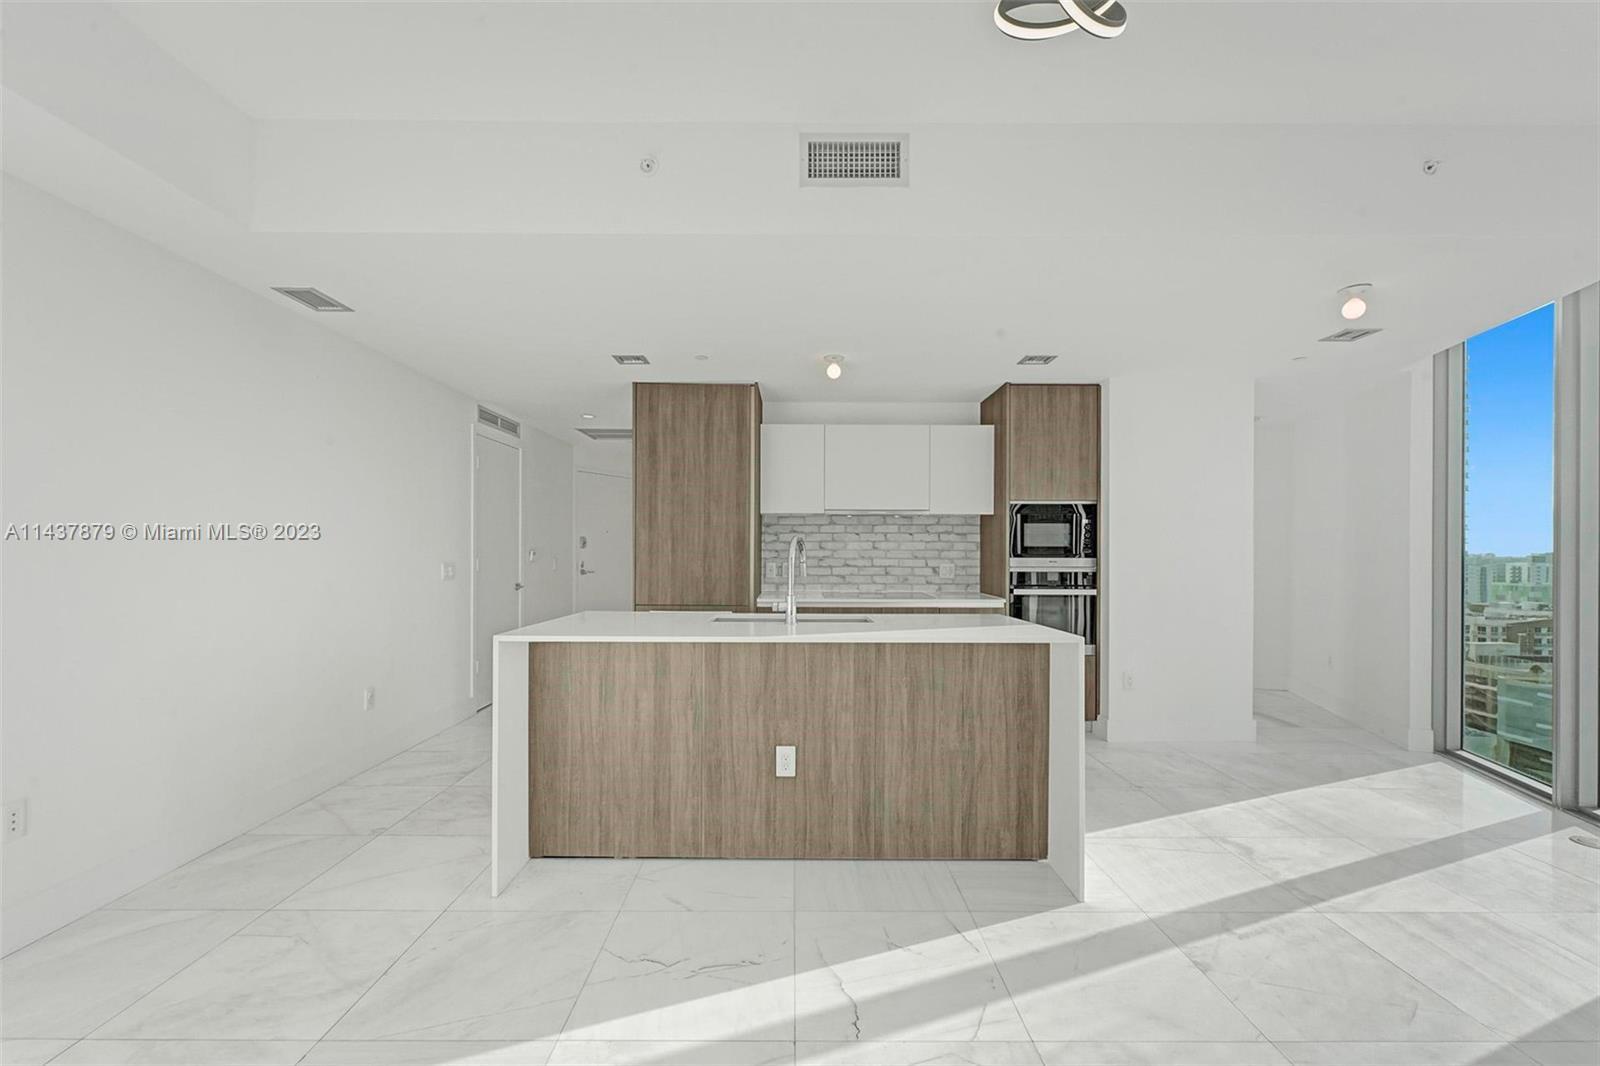 Stunning 2 bedroom 2.5 bath unit at Biscayne Beach. Floor-to-ceiling windows, blackout shades, priva